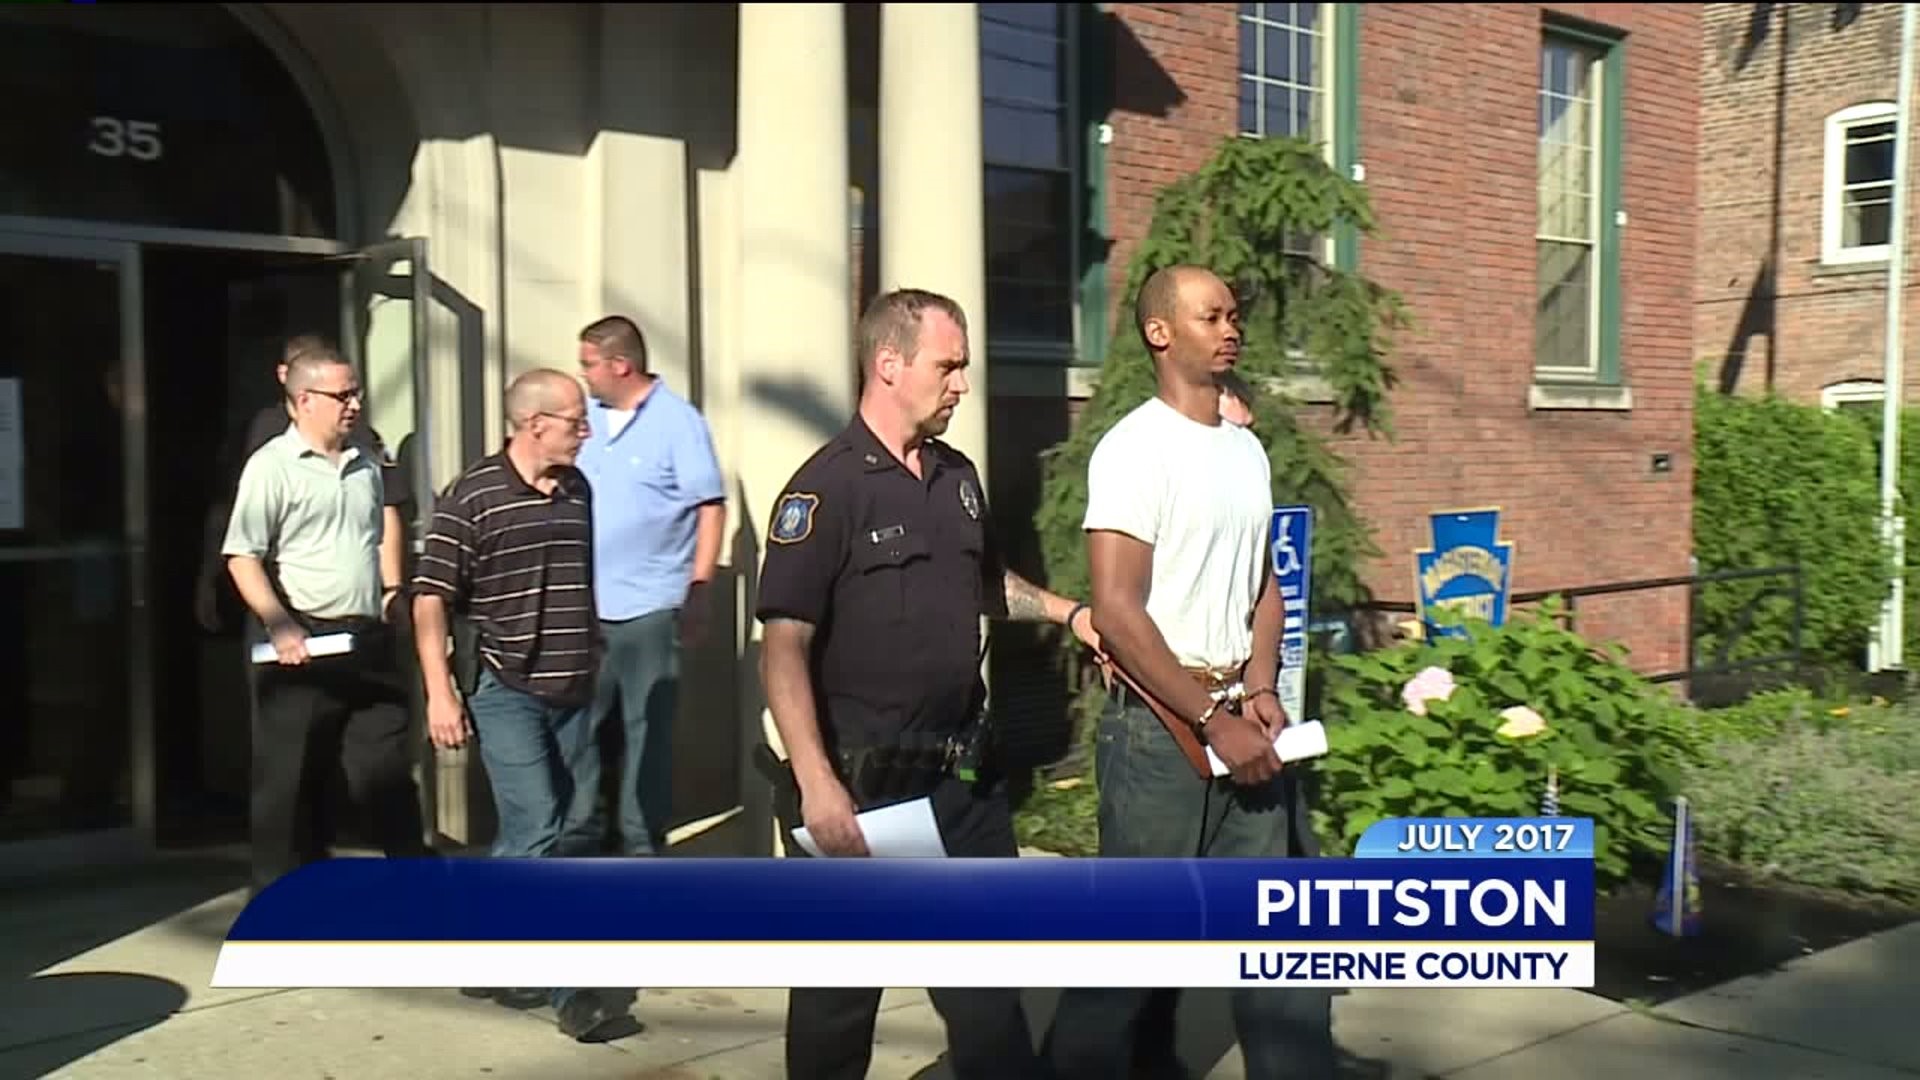 Man Acquitted on All Charges Following Deadly Bar Shooting in Pittston